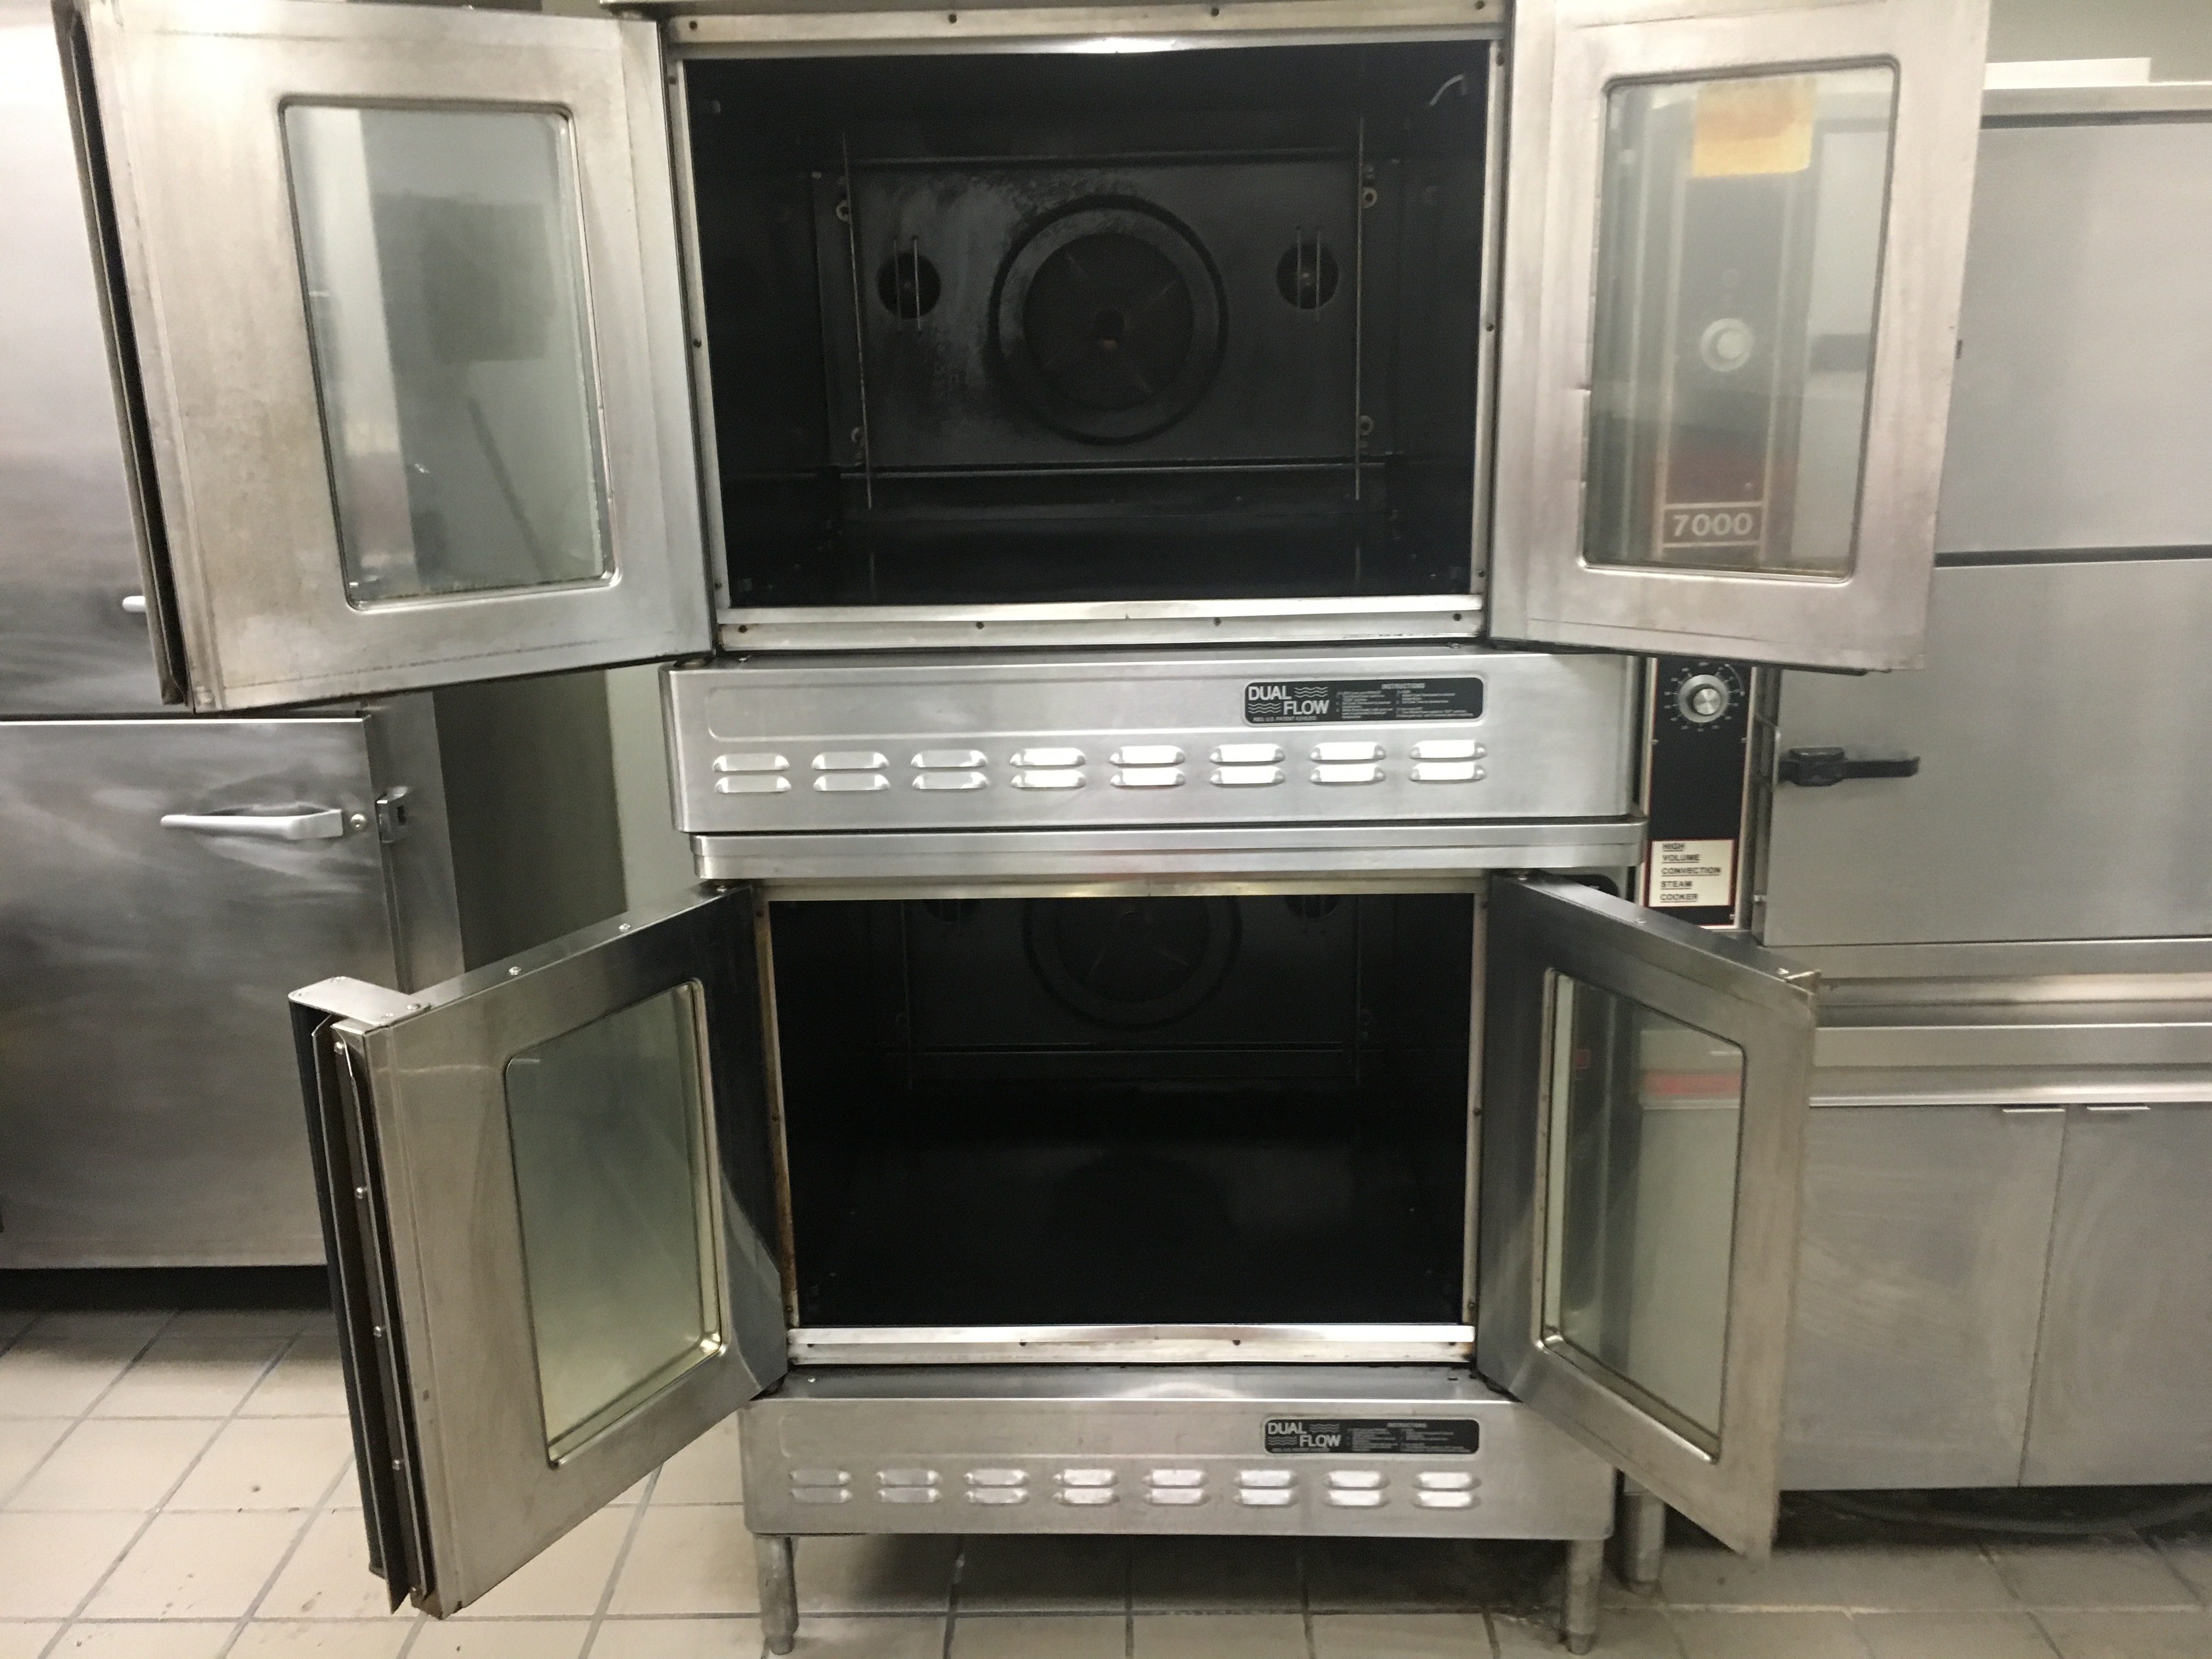 Convection Oven Cleaning After